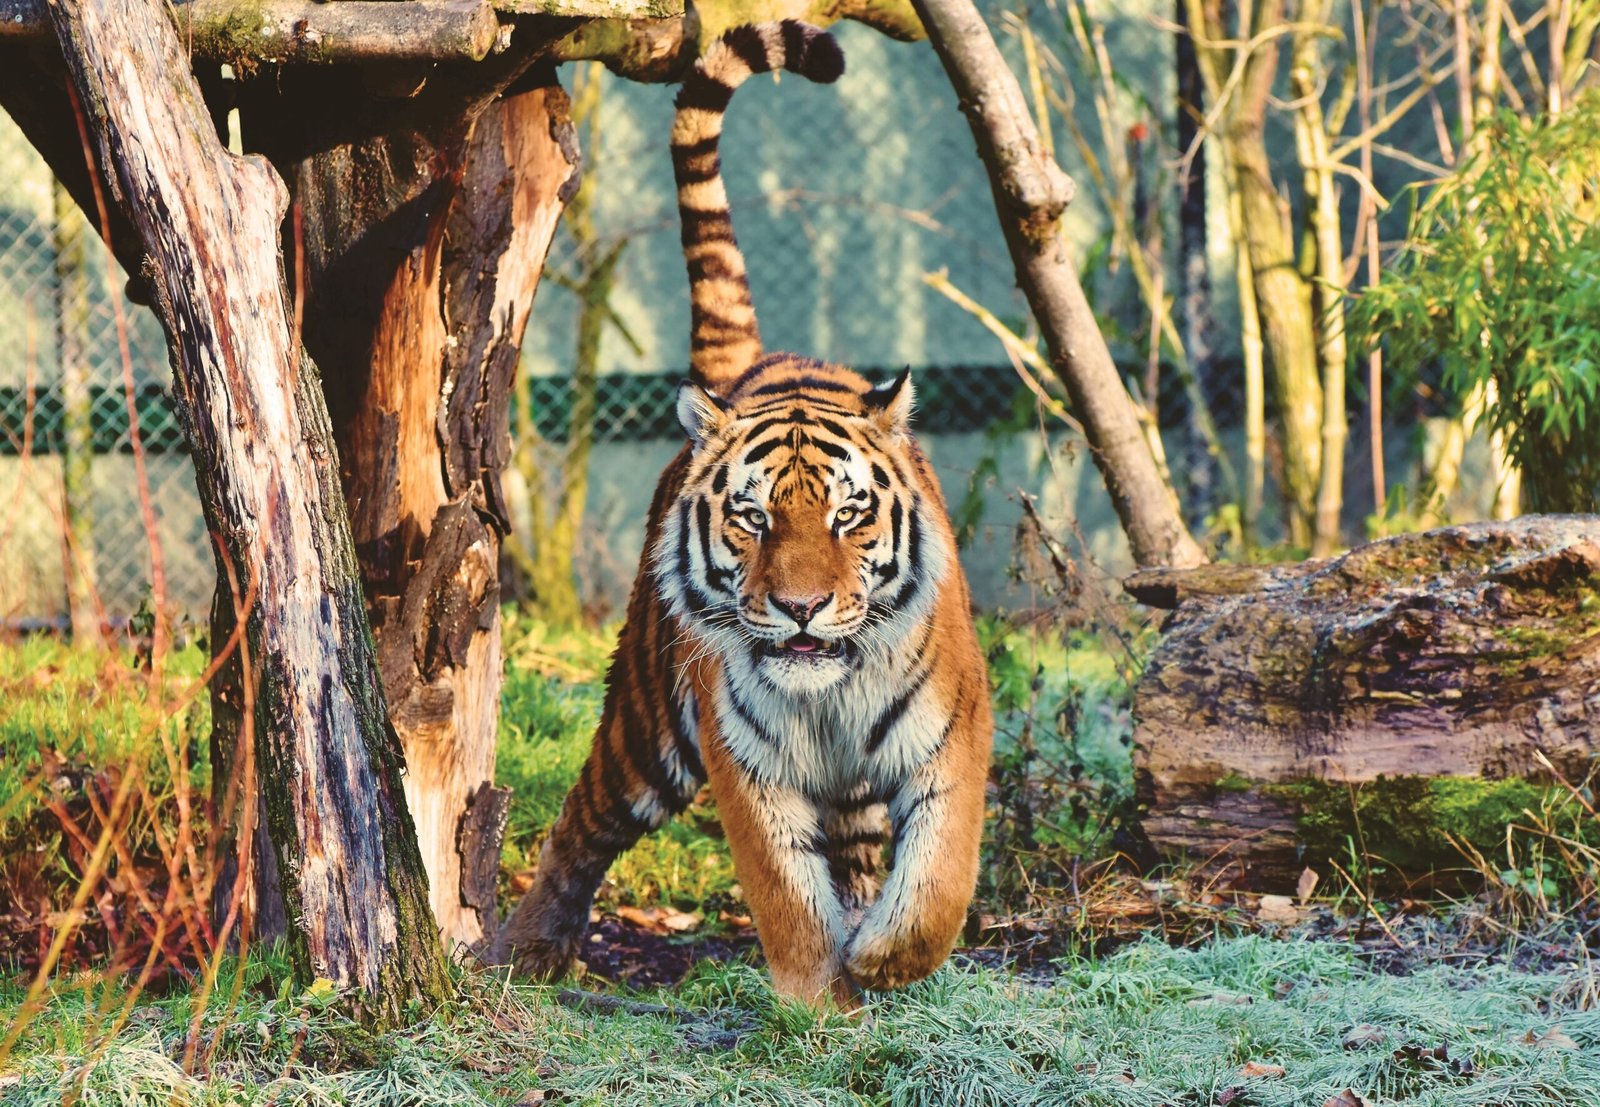 A photograph of a tiger in a zoo